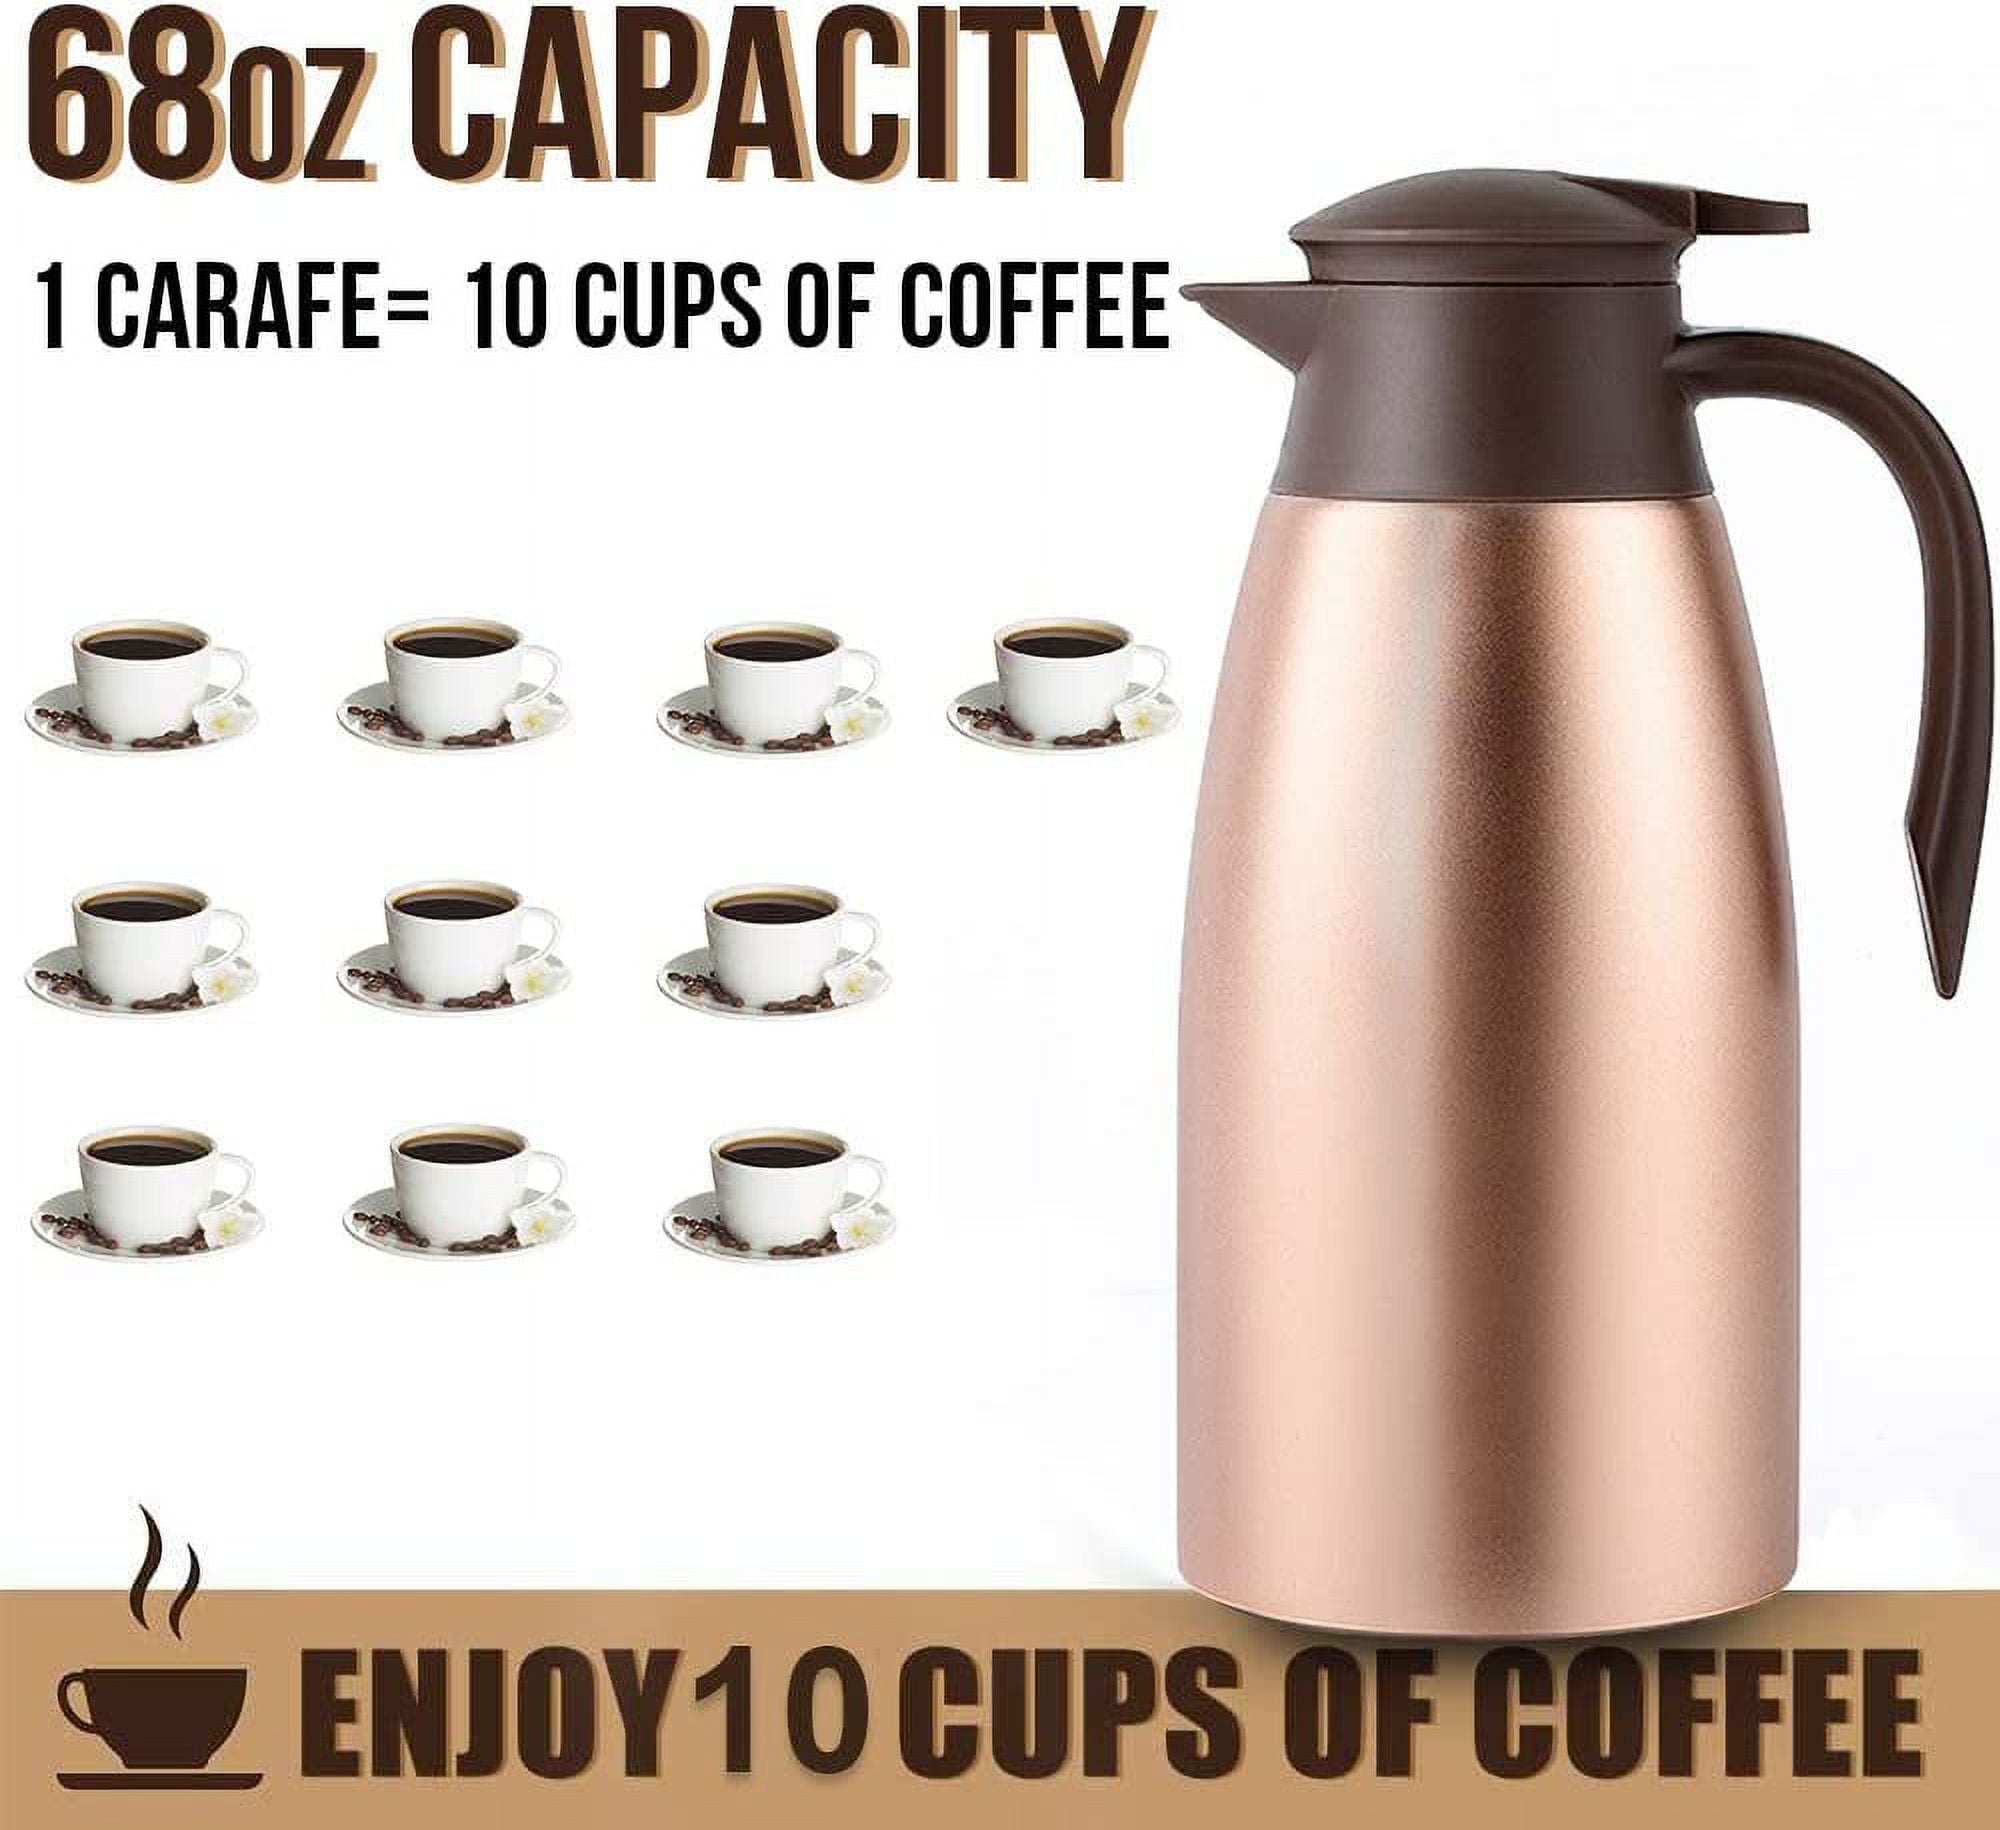 58oz Thermal Coffee Carafe Vacuum Flask with Double Wall Glass Liner- Coffee Carafes for Keeping Hot Coffee & Tea for 12 Hours by TOMAKEIT